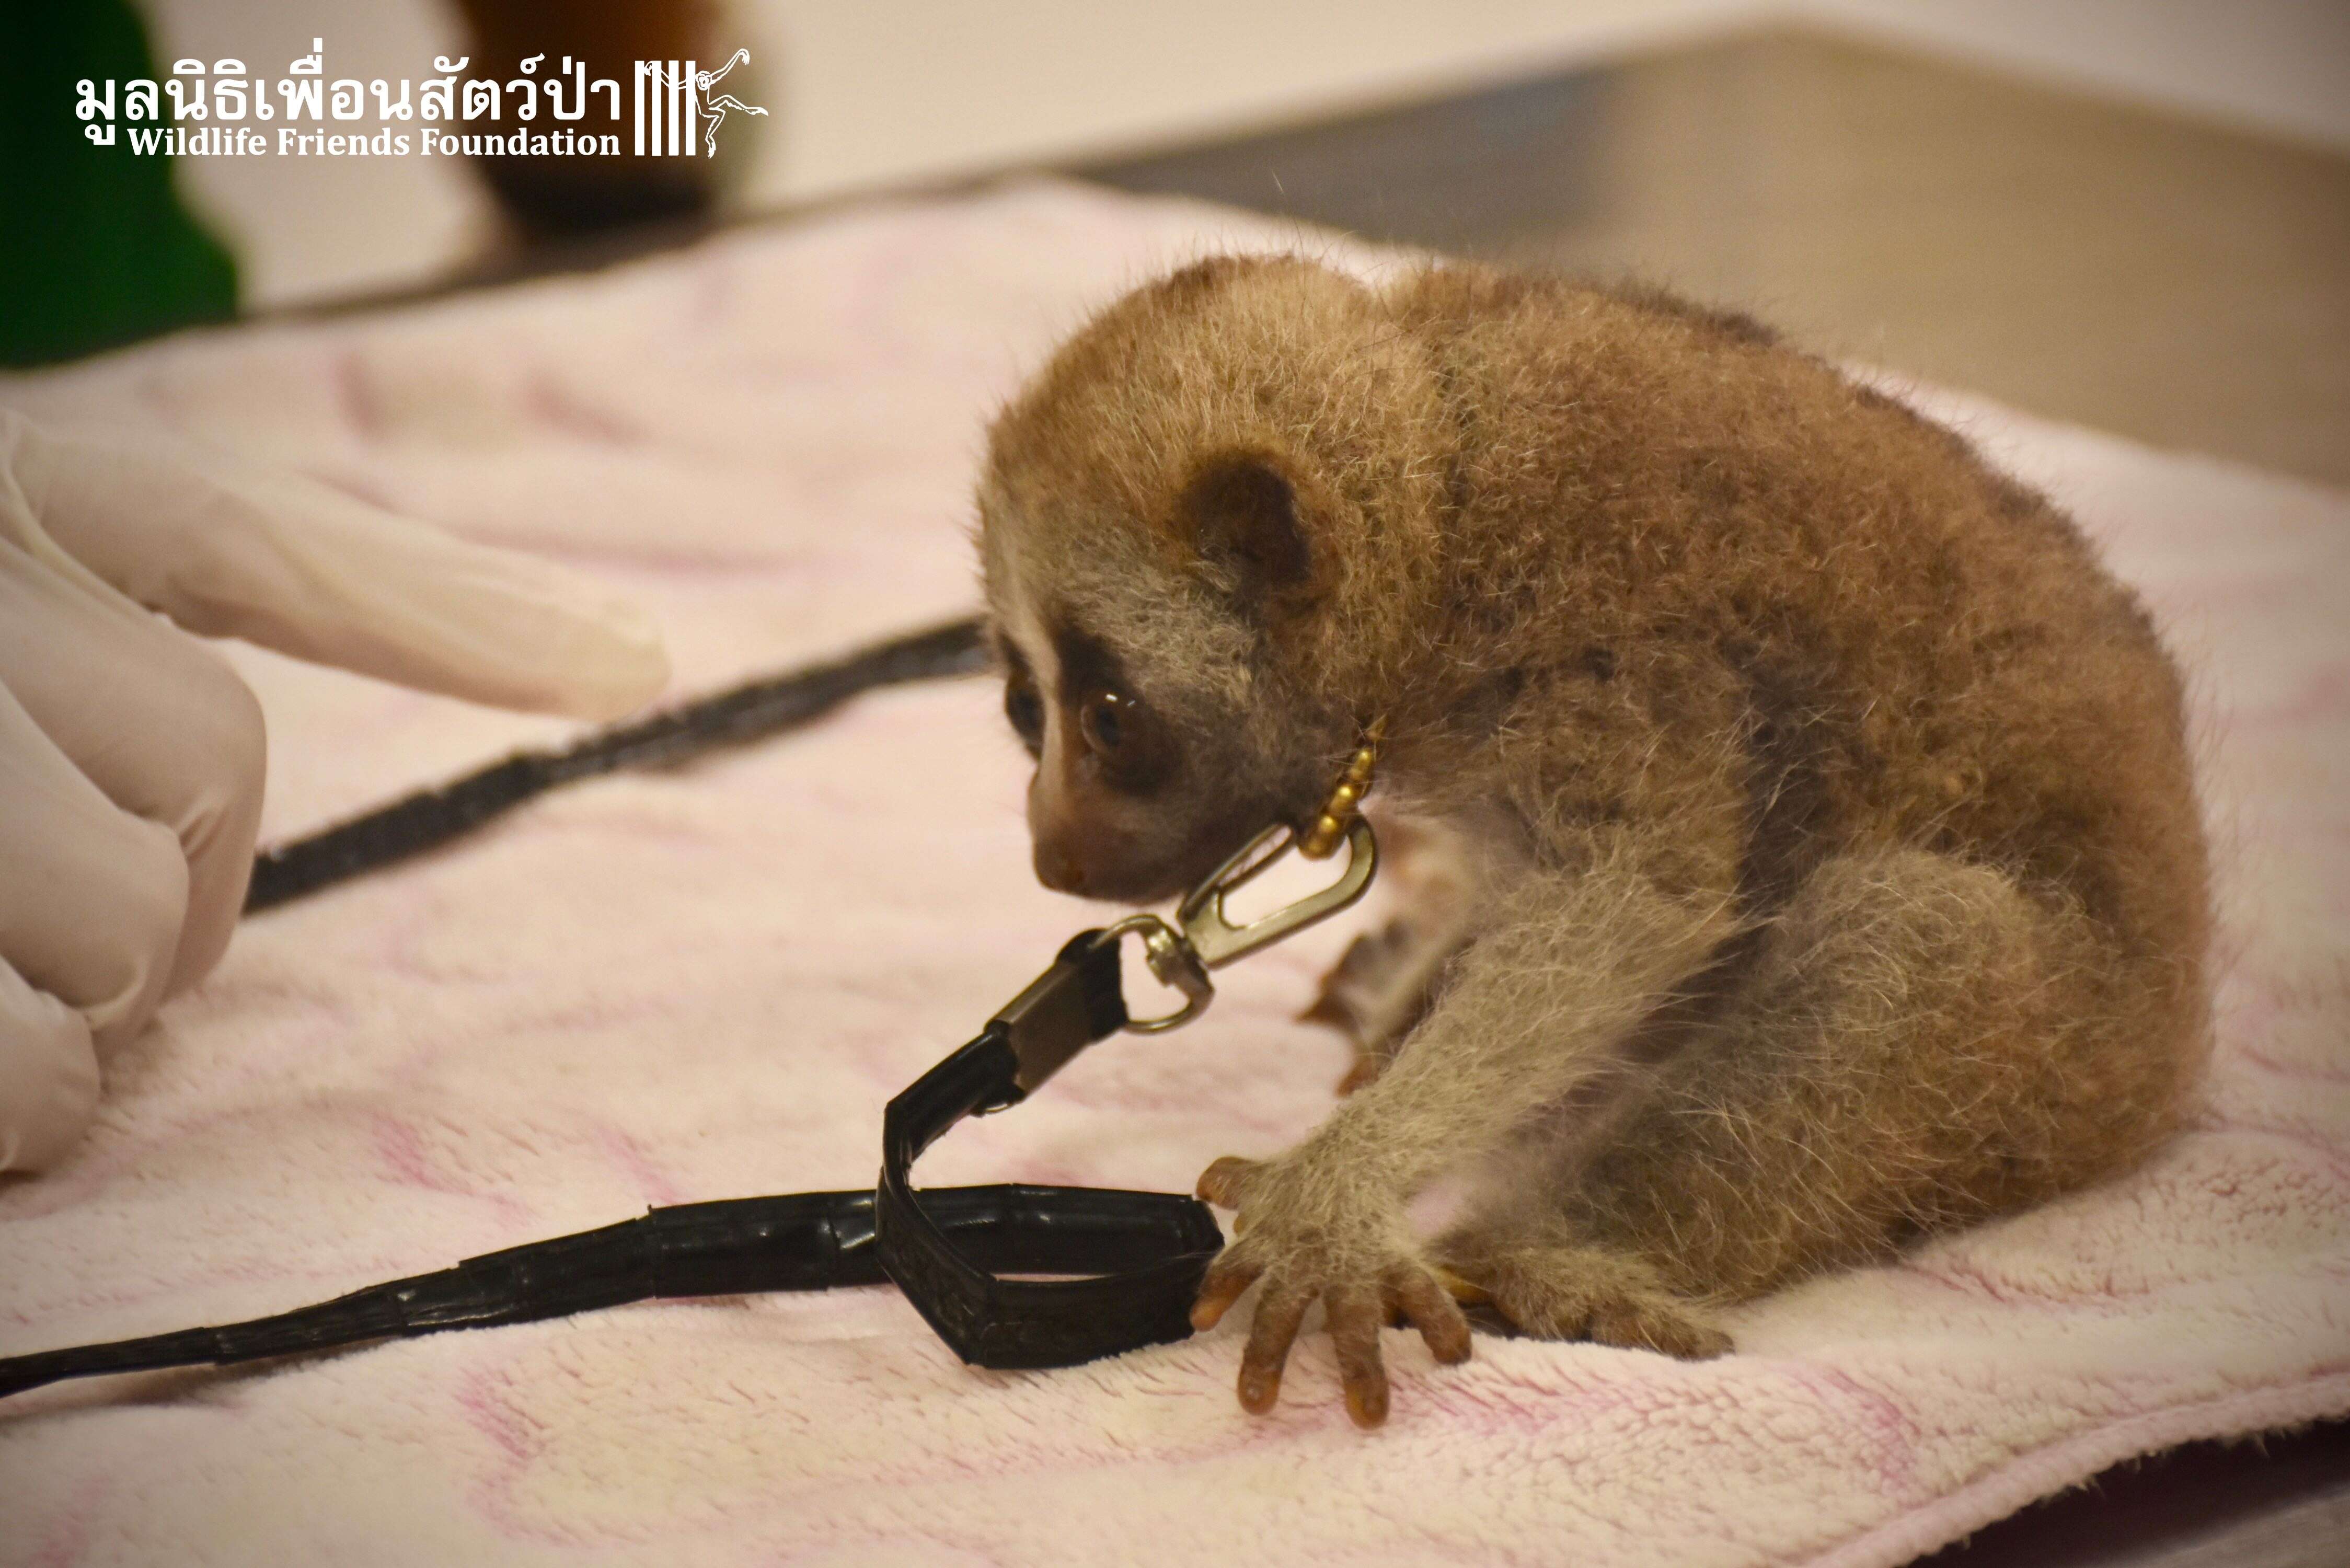 Wild slow loris rescued from restaurant in Thailand